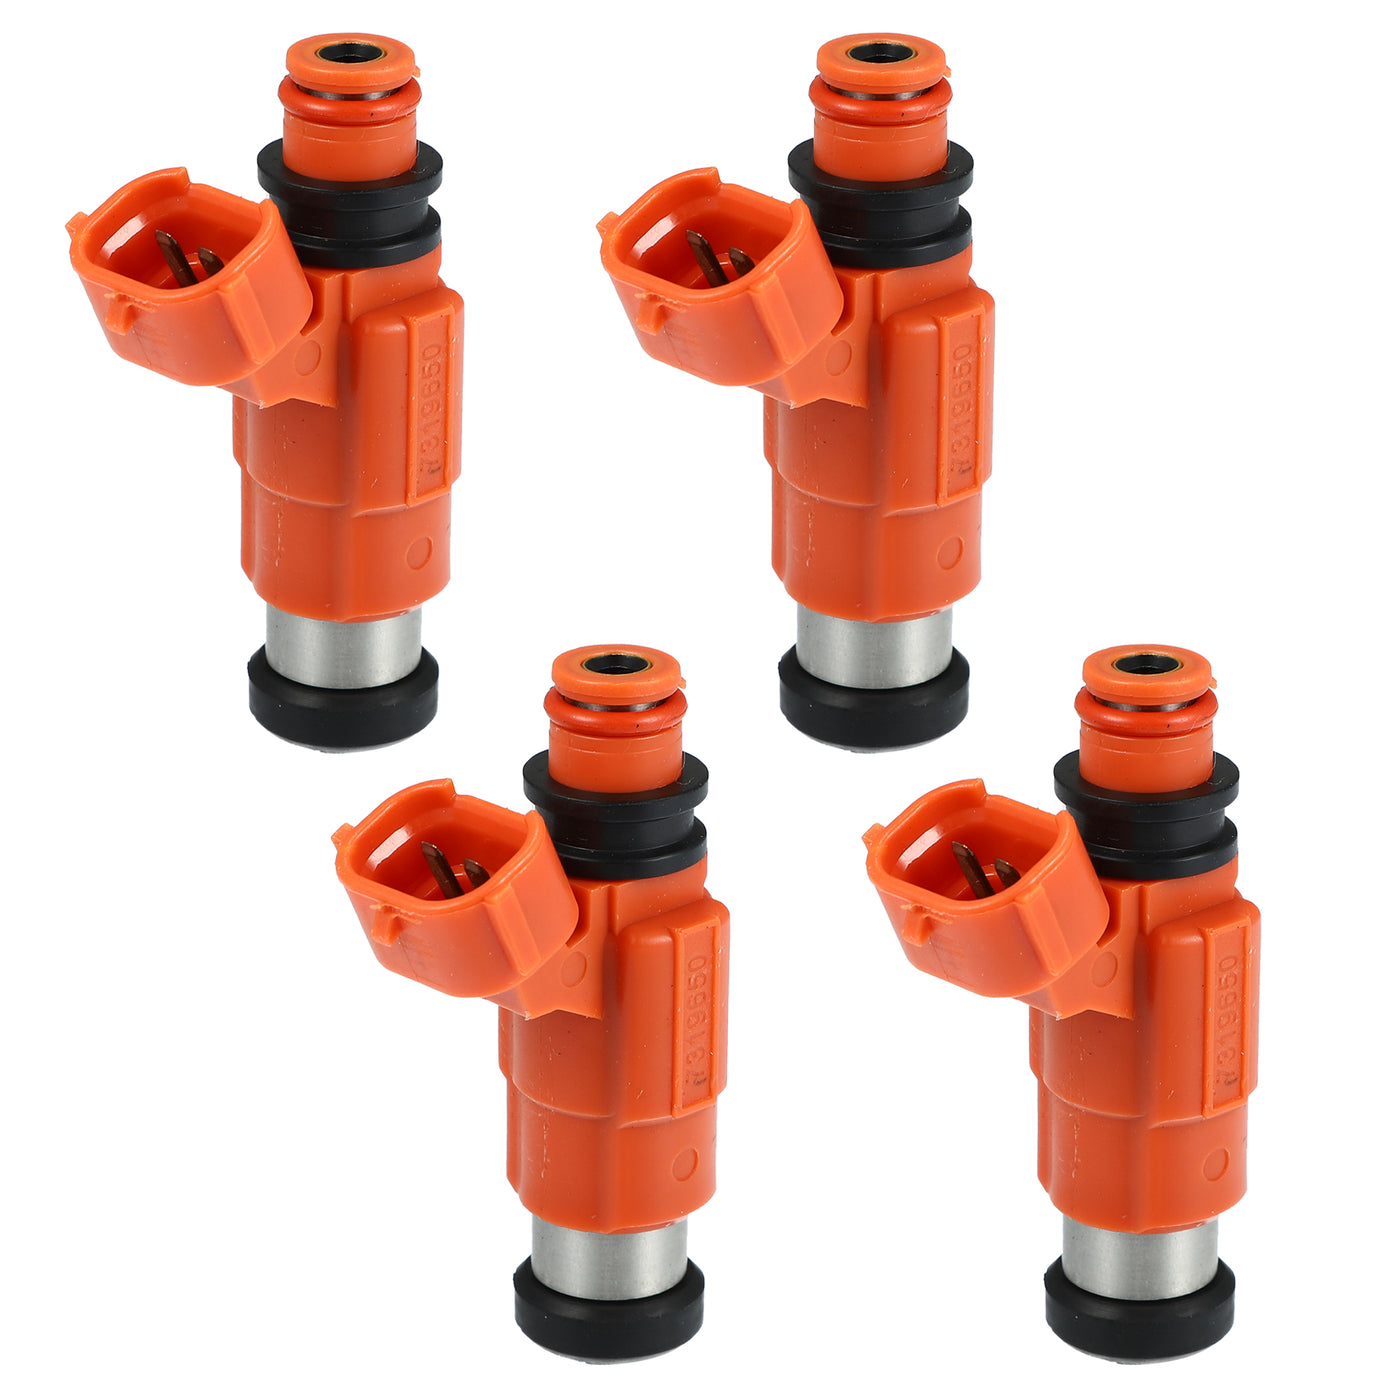 X AUTOHAUX 4pcs CDH210 Fuel Injector Replacement for Yamaha Outboard 115 HP Marine 01-15 for Chrysler Sebring 3.0L for Dodge Stratus 3.0L 2001-2005